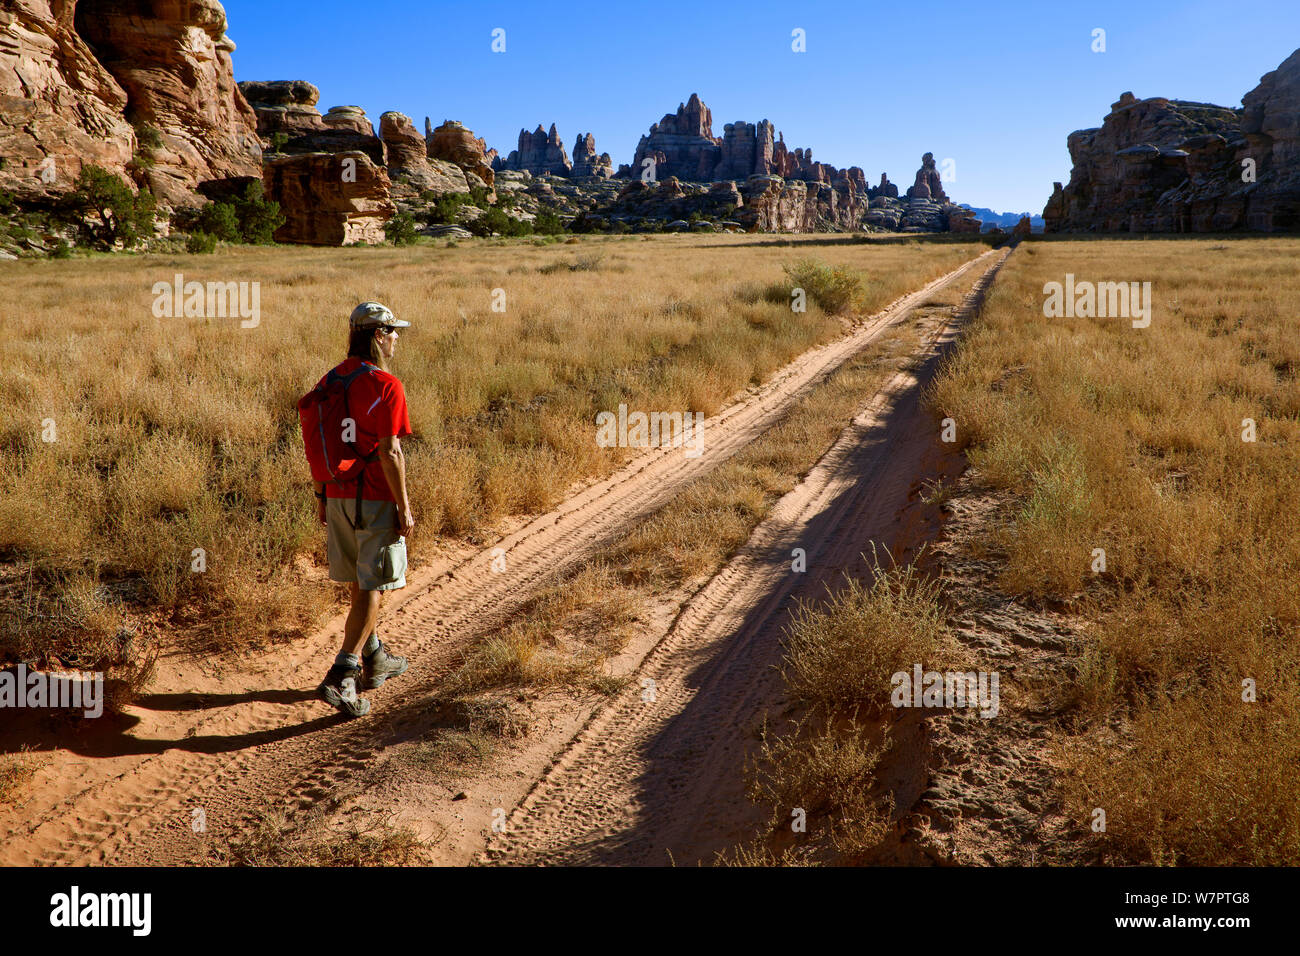 Hiker on the Devils Lane 4-wheel drive trail in the Needles District. Canyonlands National Park, Utah, October 2012. Model released. Stock Photo